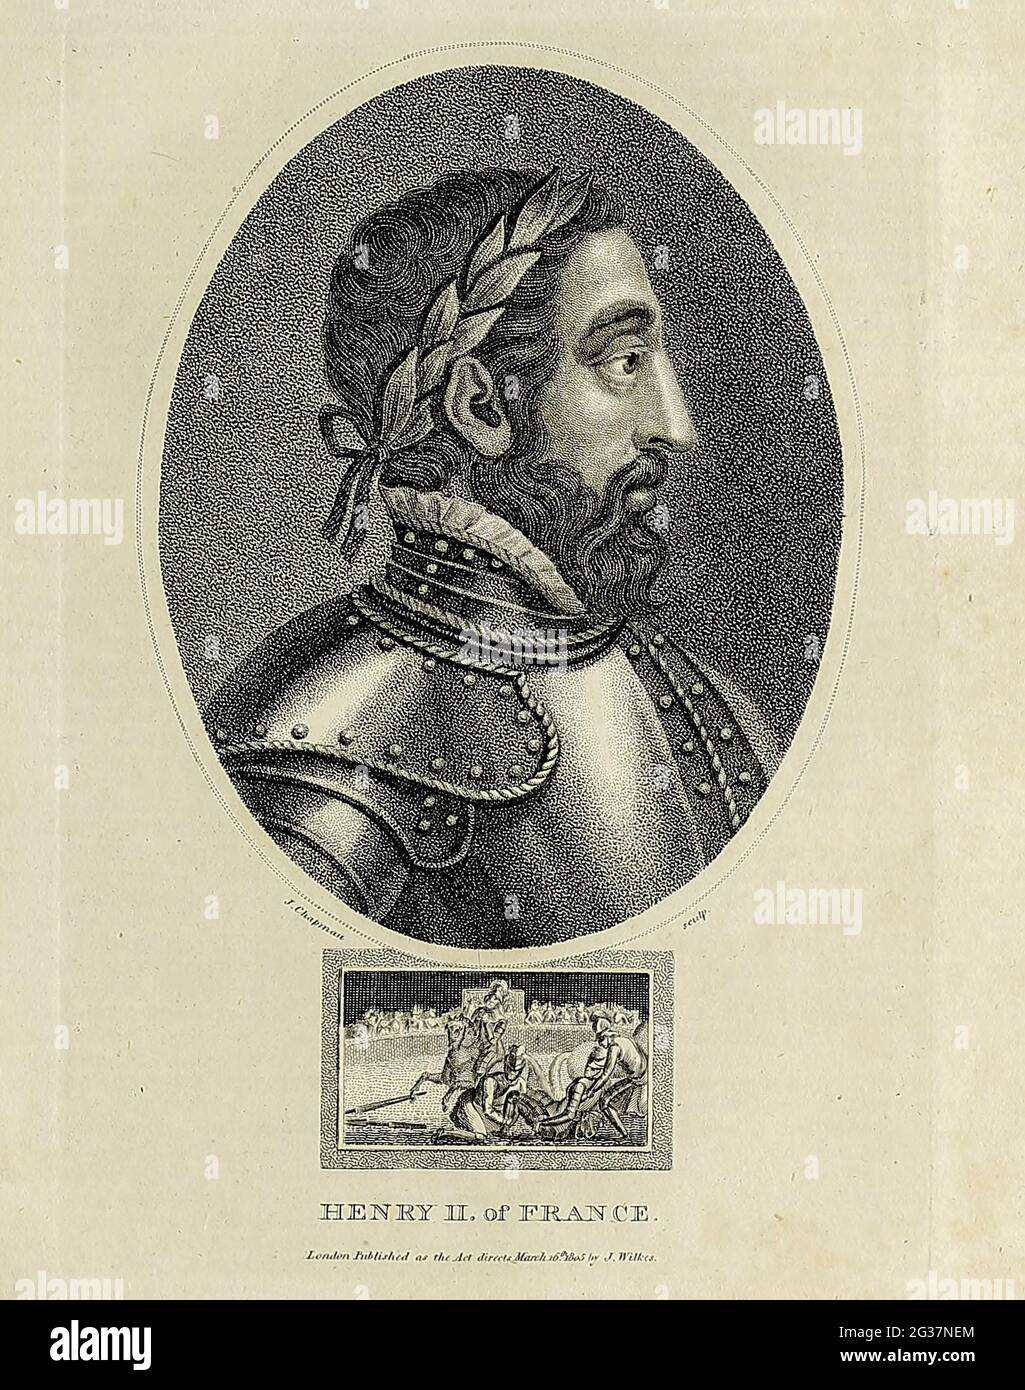 Henry II of France Henry II (French: Henri II; 31 March 1519 – 10 July 1559) was King of France from 31 March 1547 until his death in 1559. The second son of Francis I, he became Dauphin of France upon the death of his elder brother Francis III, Duke of Brittany, in 1536.  Copperplate engraving From the Encyclopaedia Londinensis or, Universal dictionary of arts, sciences, and literature; Volume VII;  Edited by Wilkes, John. Published in London in 1810 Stock Photo